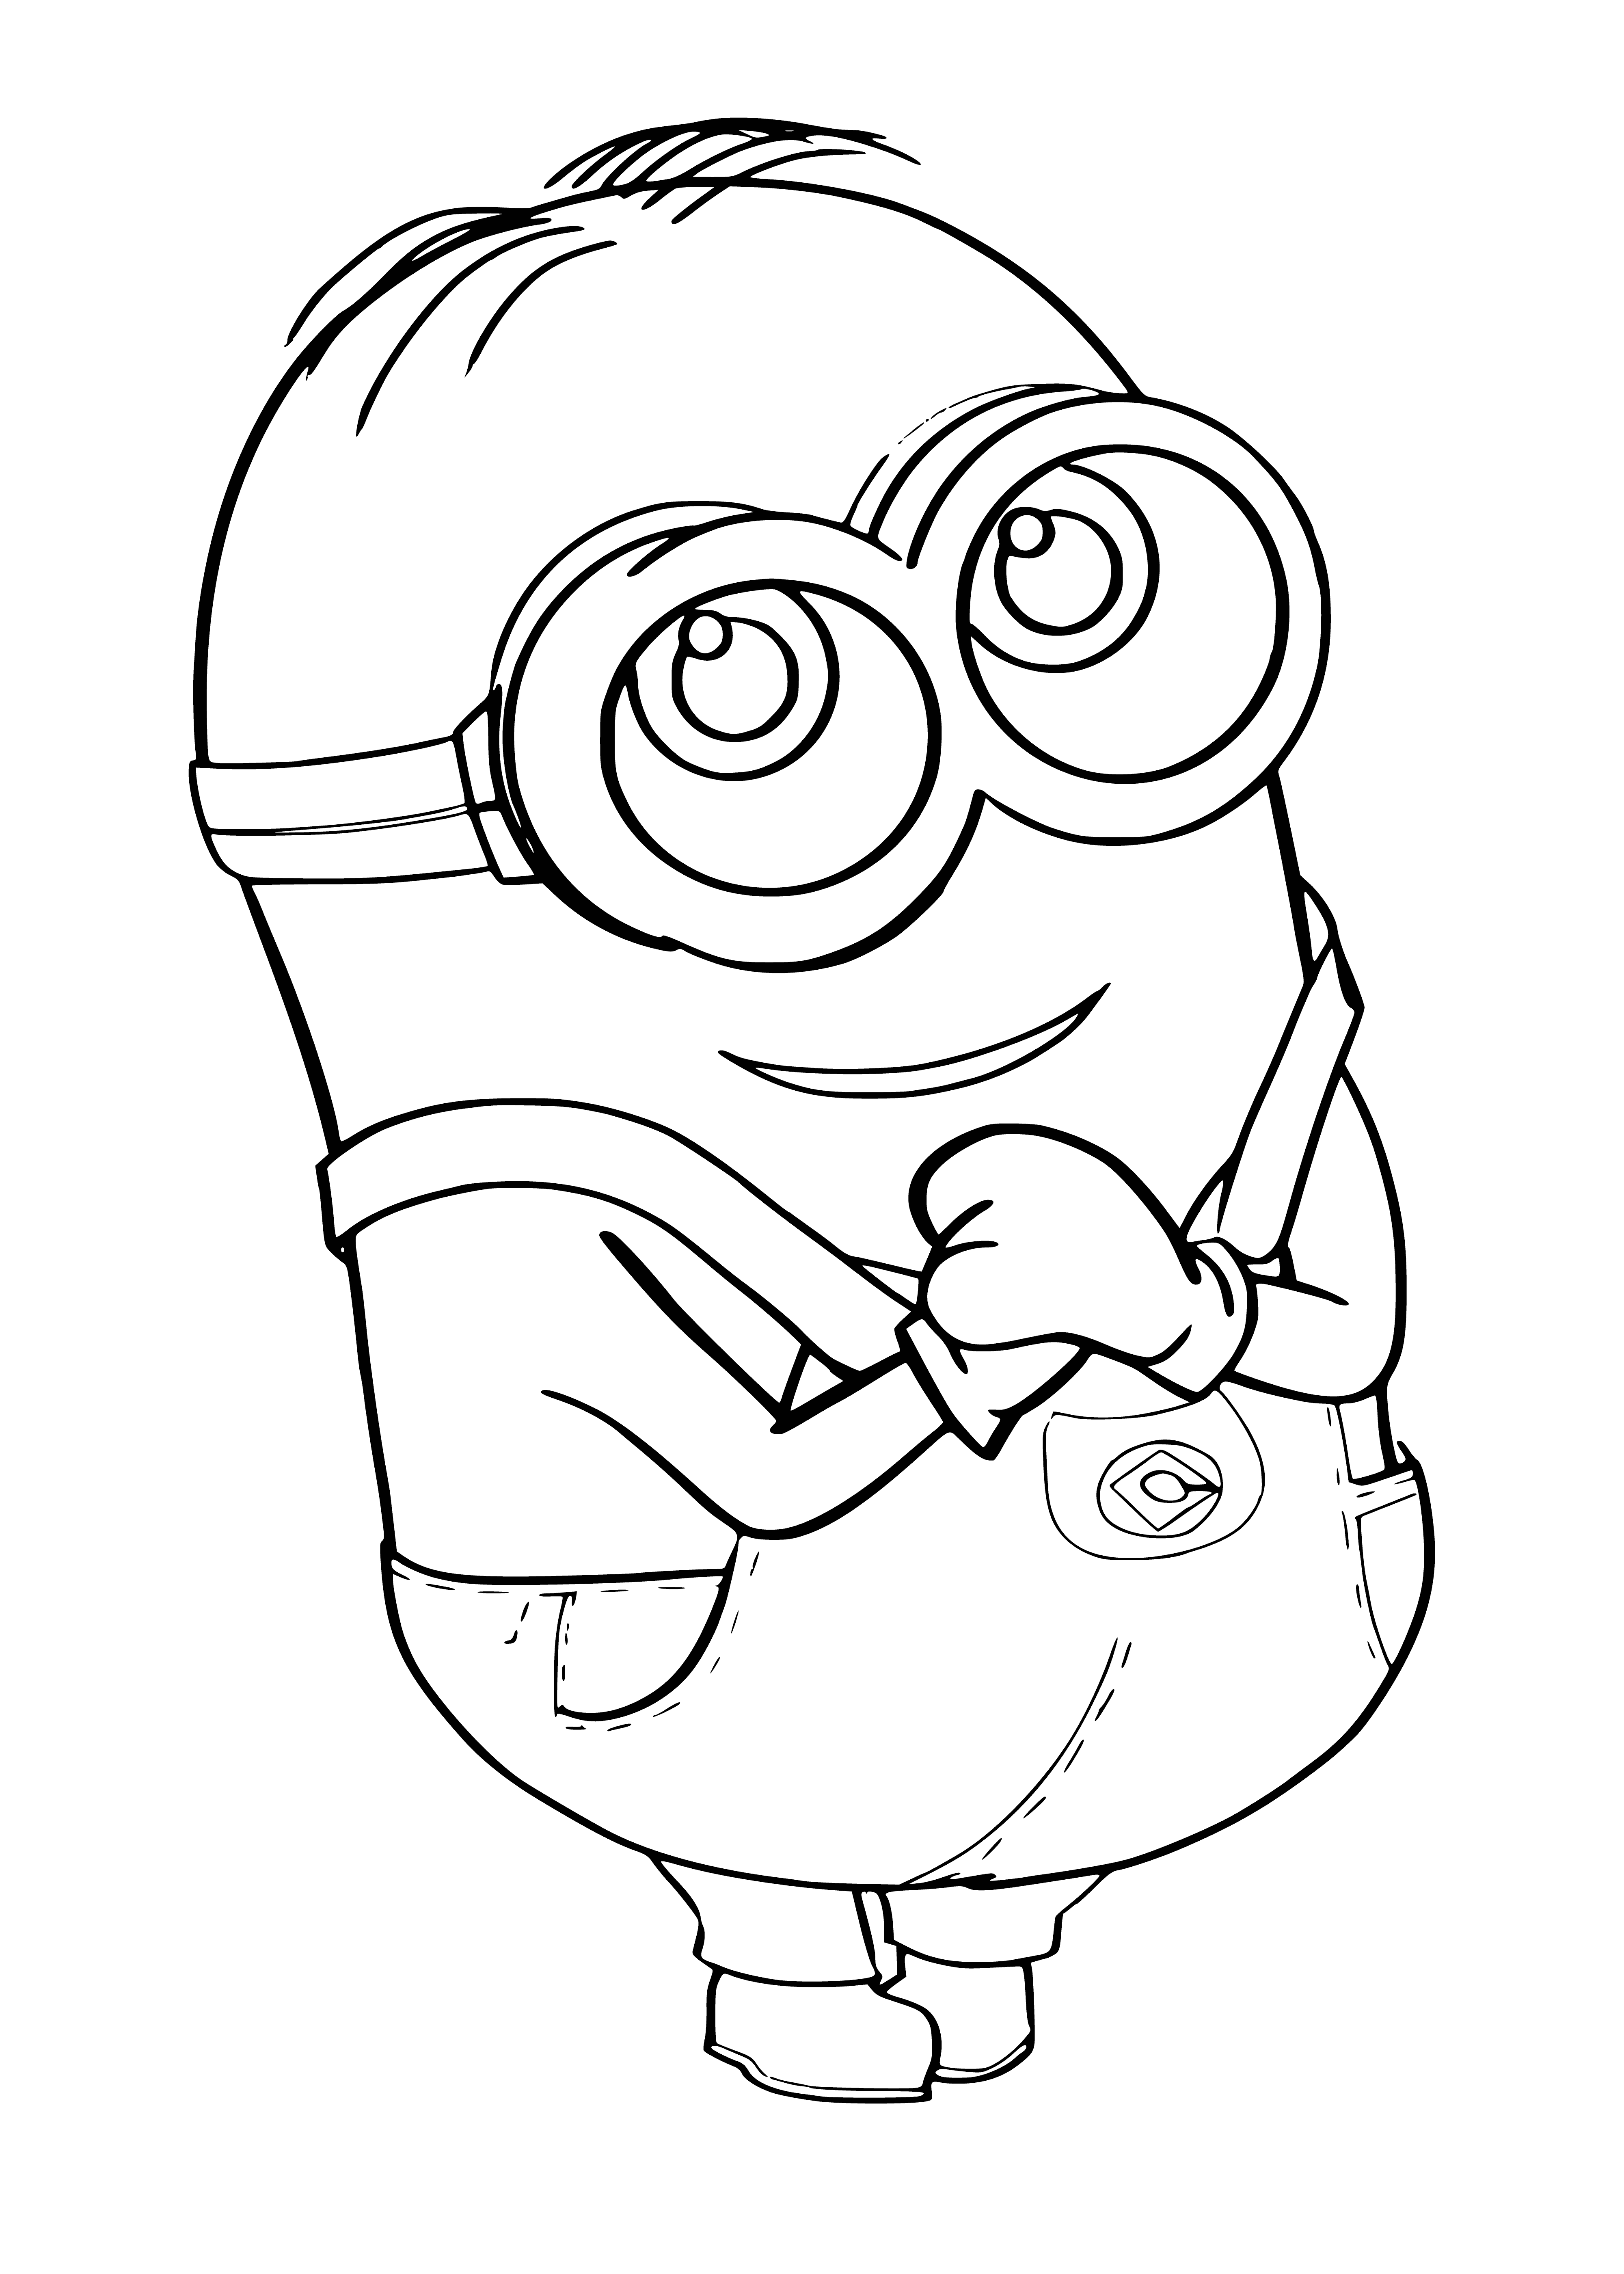 coloring page: Three banana people wearing blue coveralls, one showing a tooth, holding hands, with big eyes & mouths.